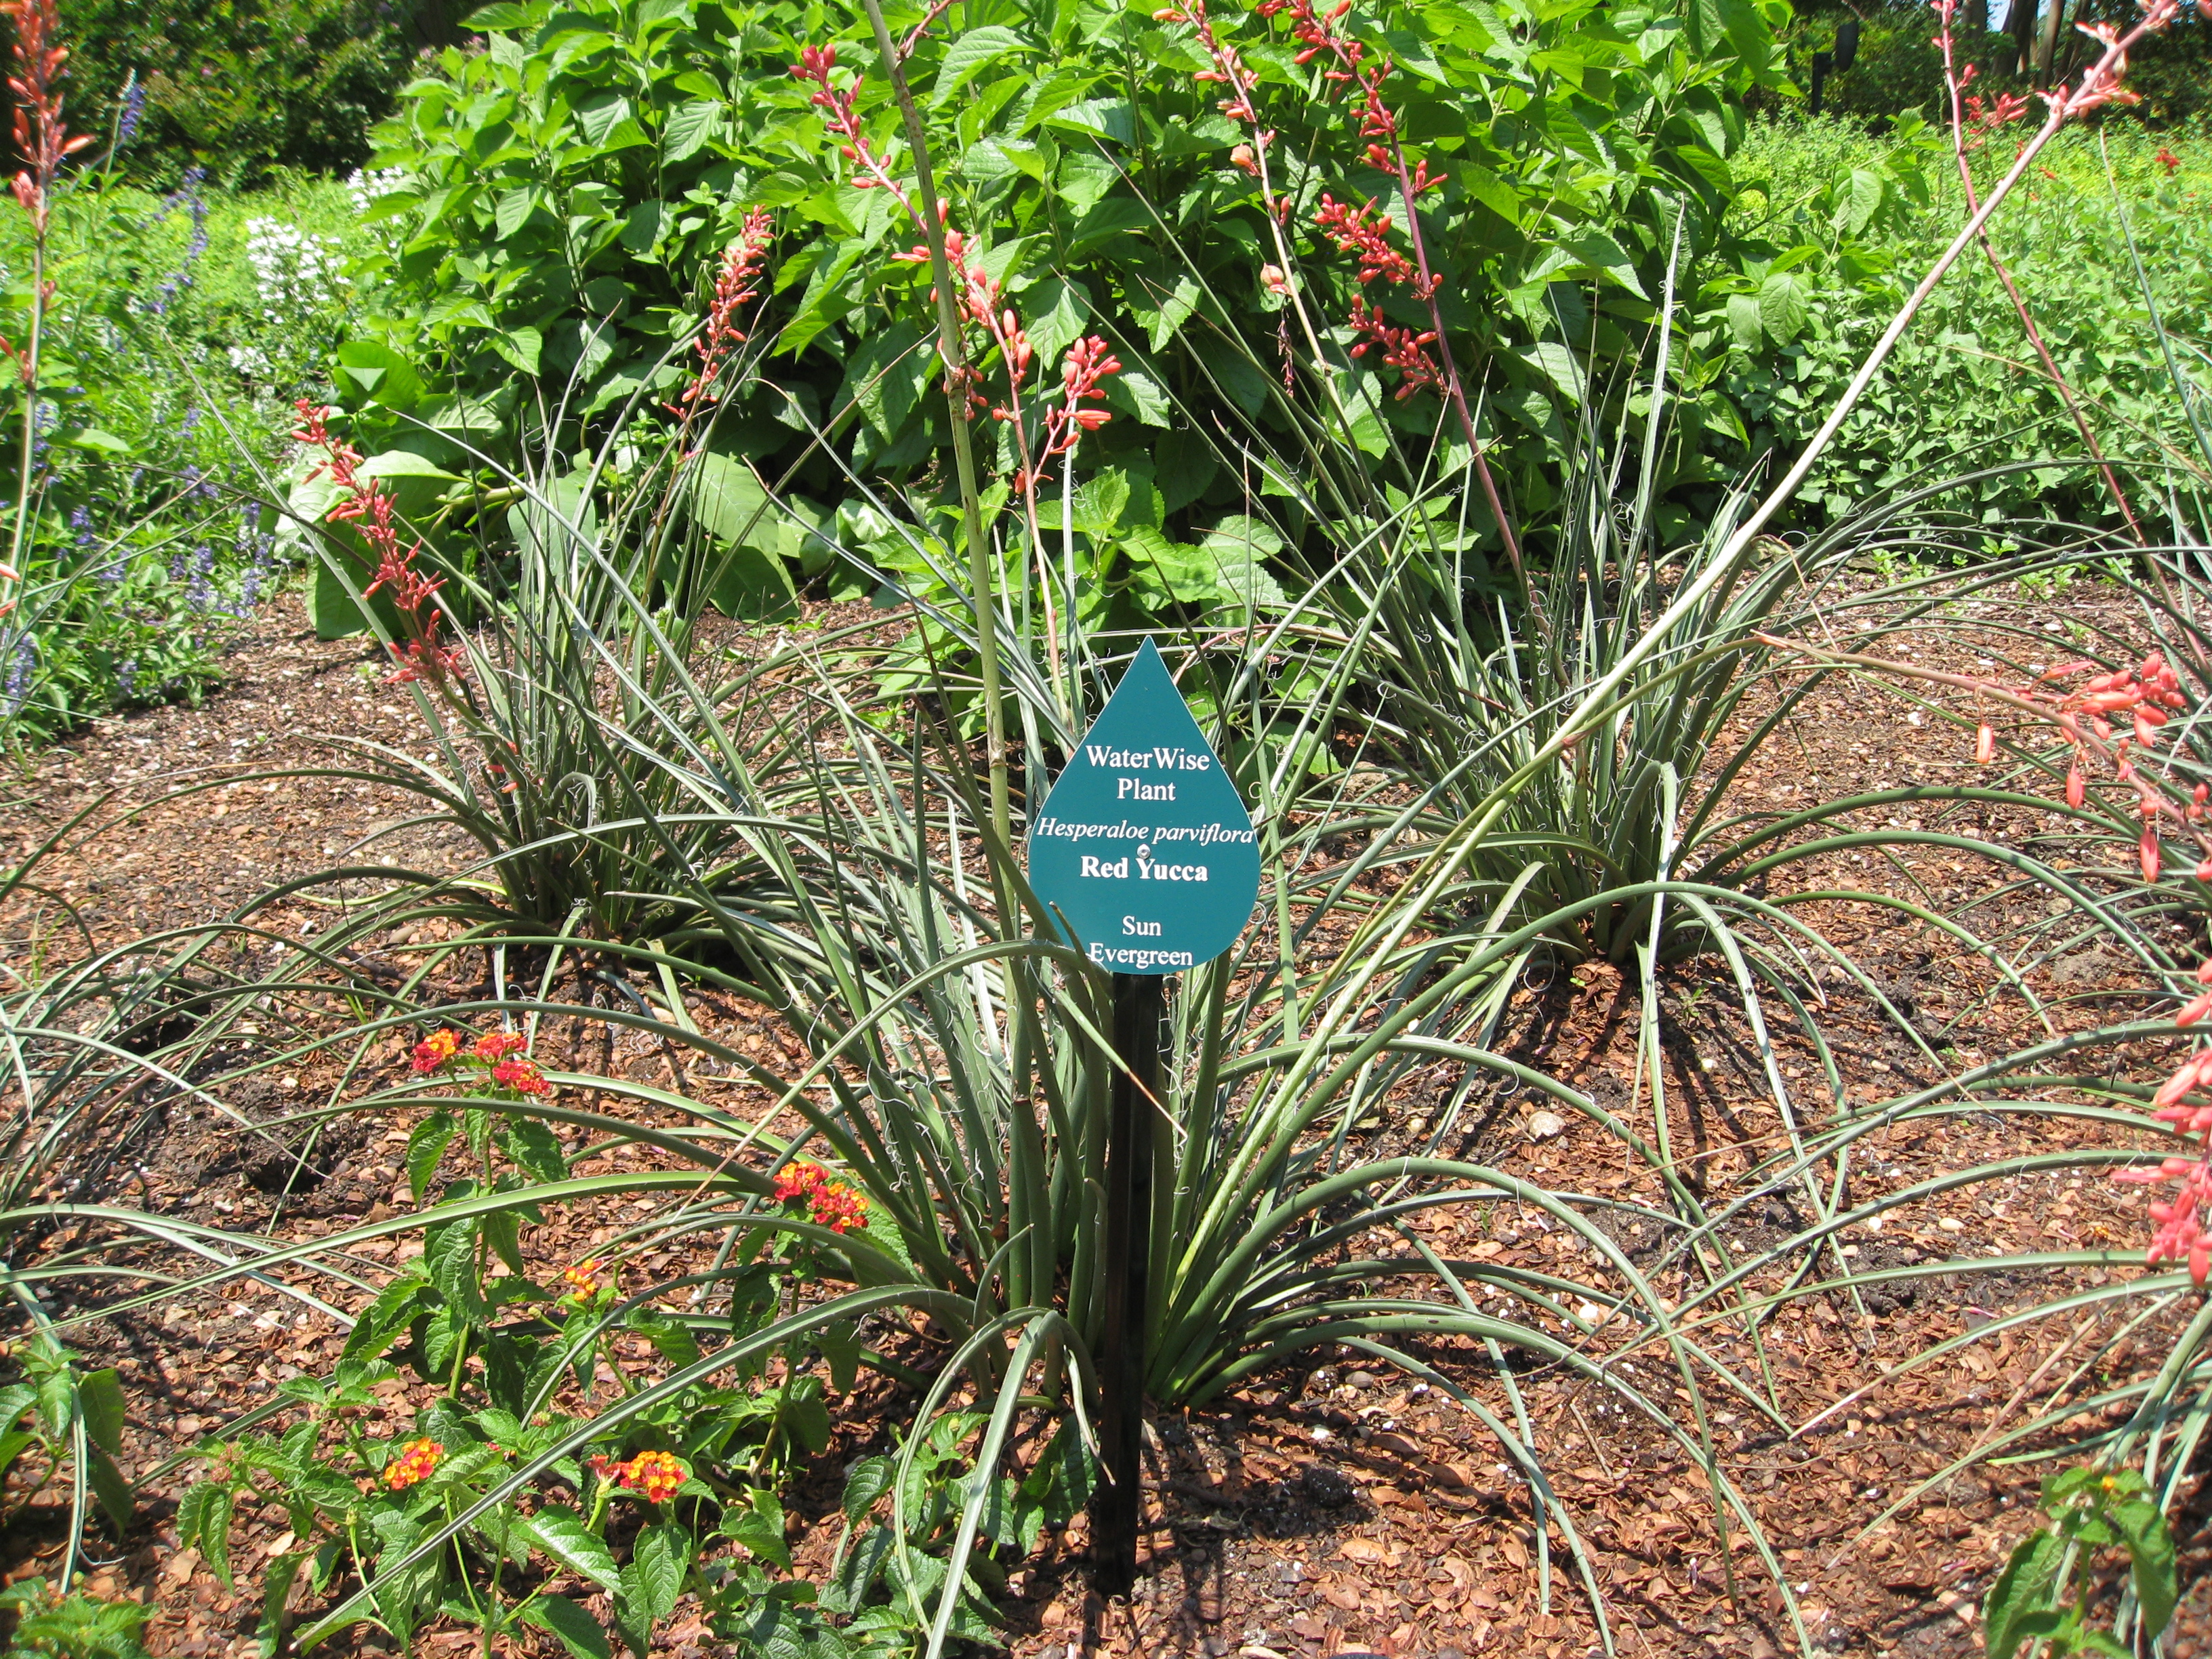 Red Yucca was found all over Dallas-area landscapes. 